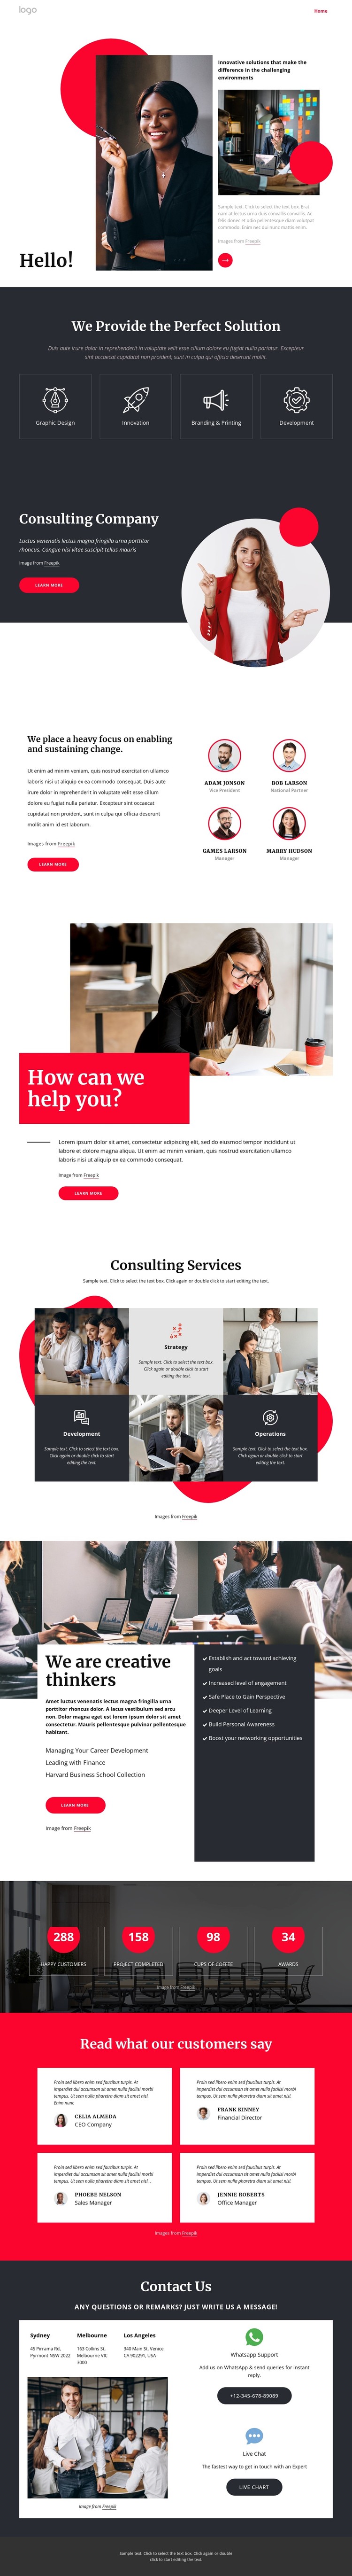 Consulting company NYC Static Site Generator